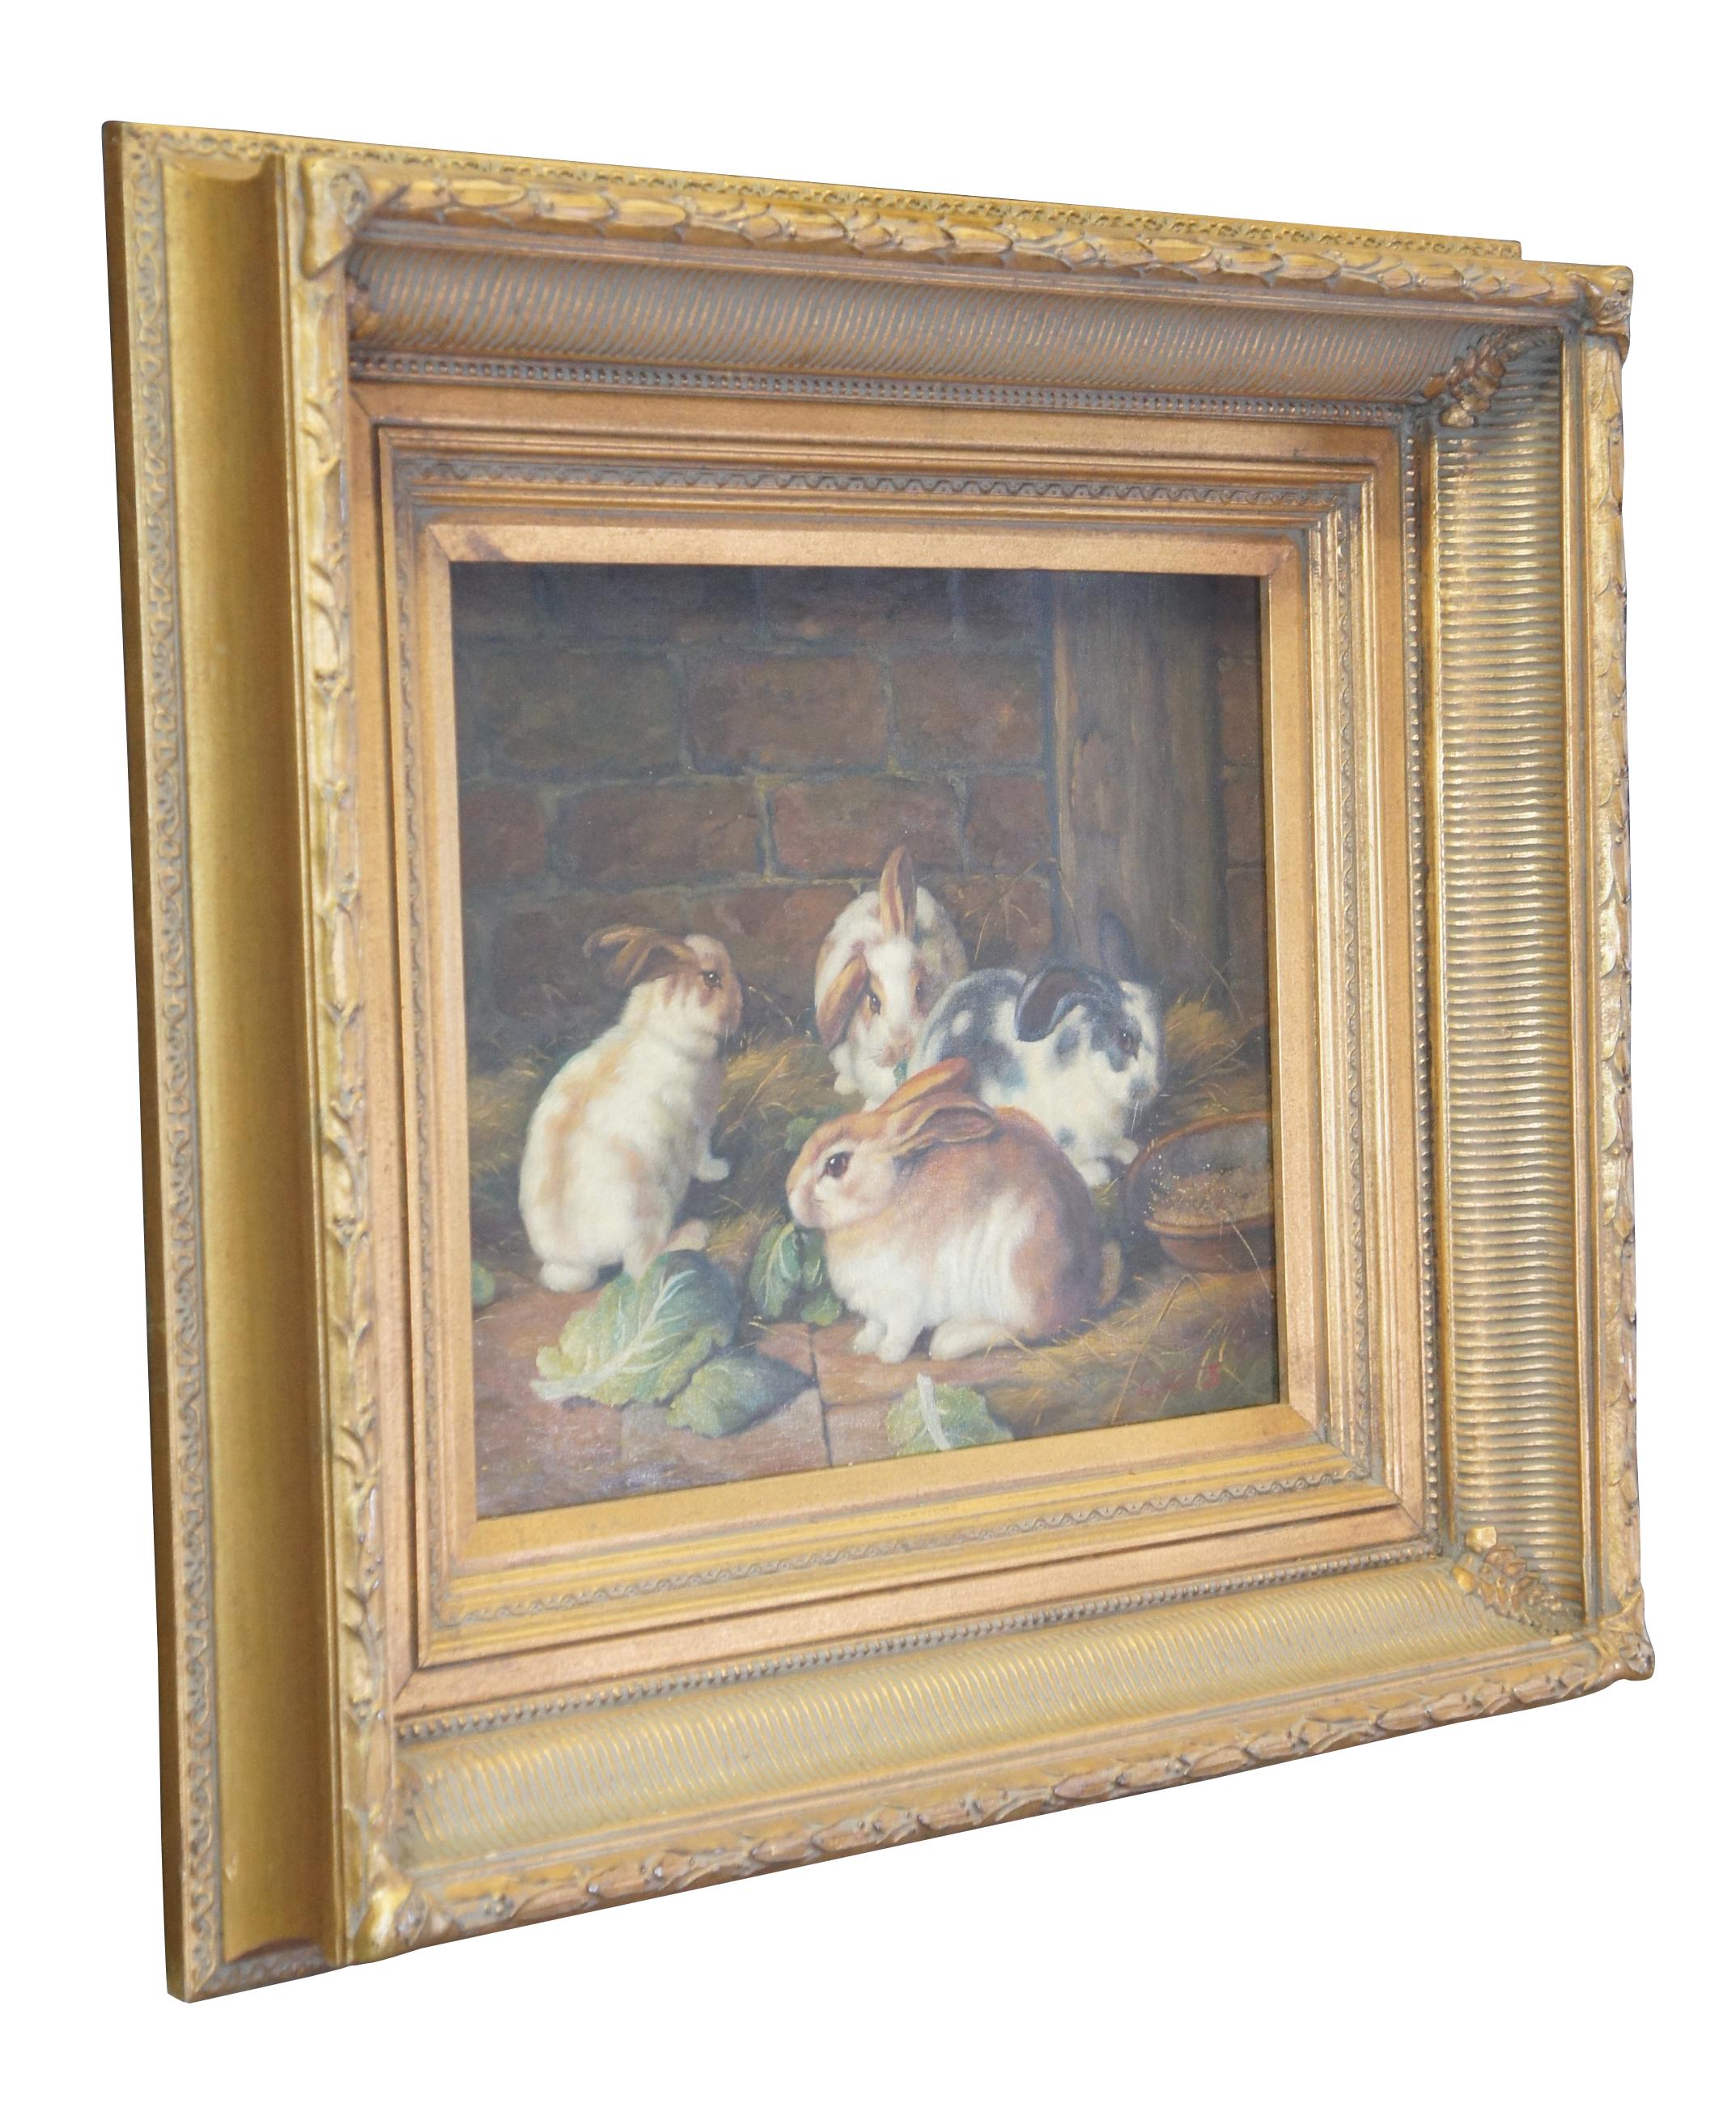 A lovely 20th century painting of Rabbits eating cabbage in a farmhouse setting. The oil painting is signed along the lower right side of the canvas by Nicolas. Features an ornately detailed French frame in tarnished gold.

Sans Frame - 20